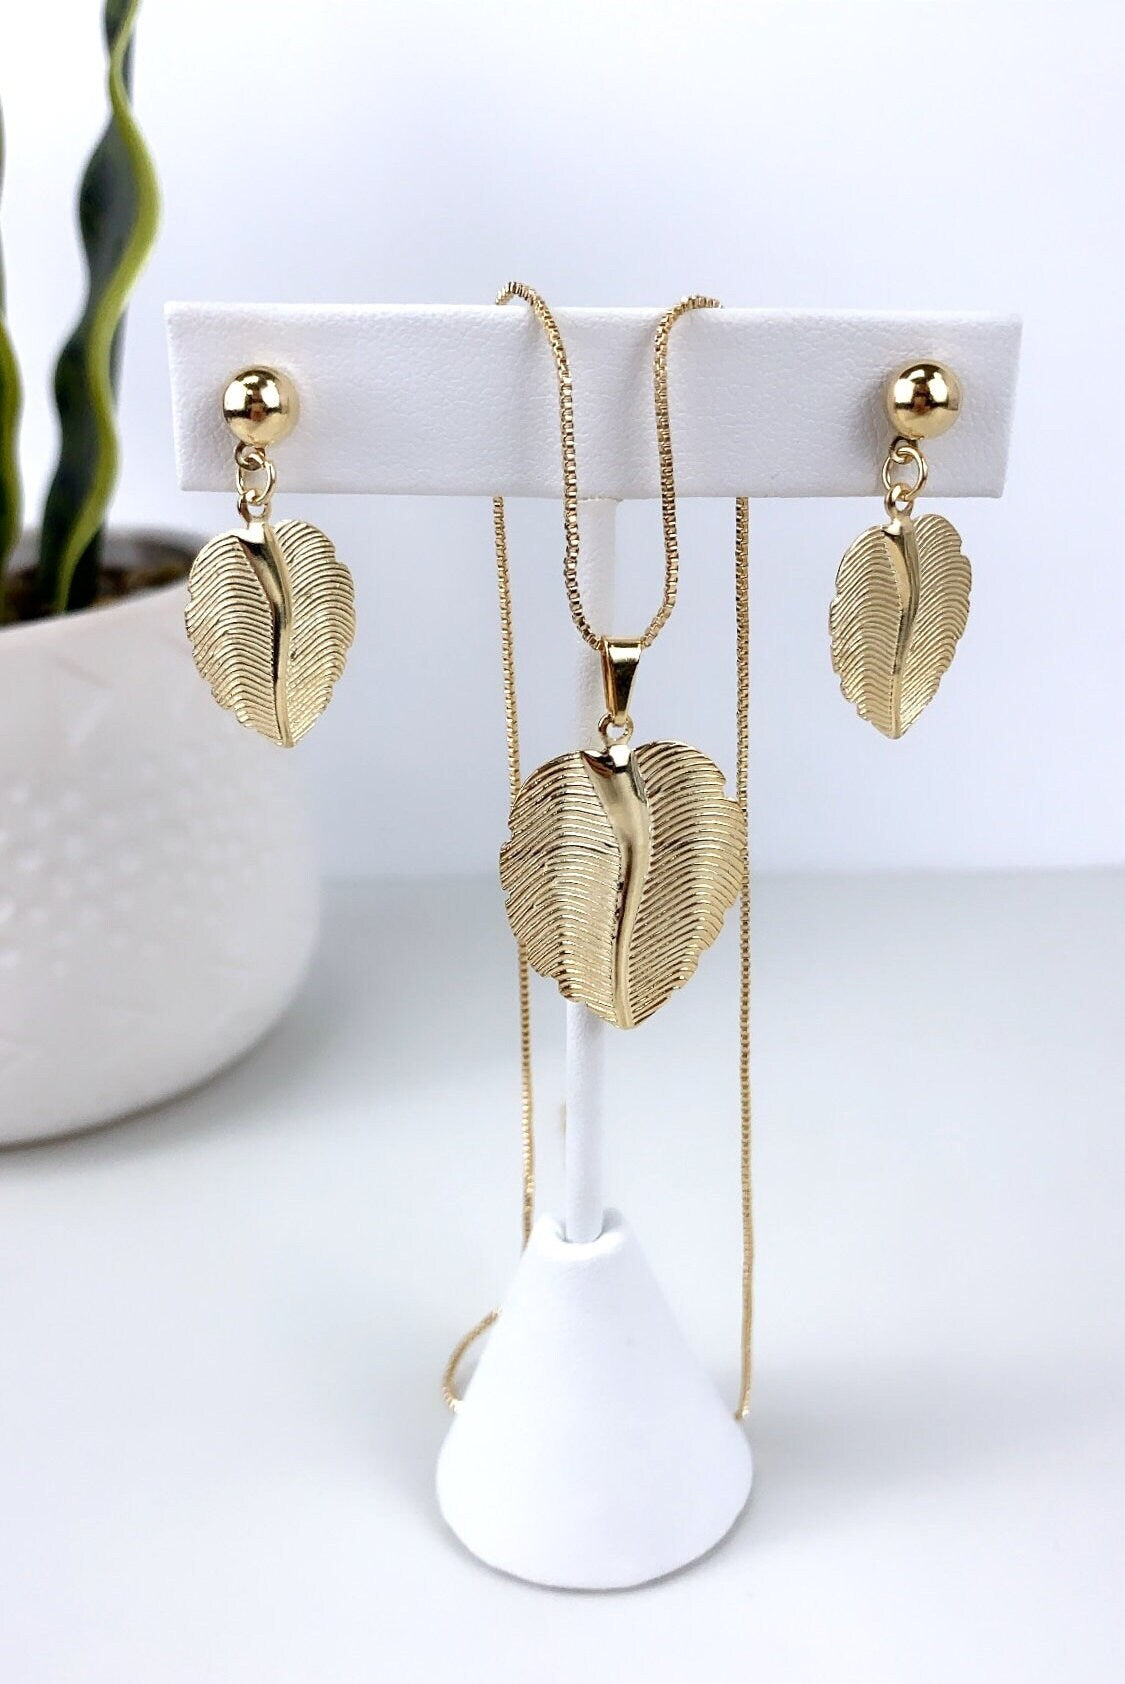 18k Gold Filled 1mm Box Chain with Texturized Leaf Shape Design Pendant & Leaf Earrings Set, Wholesale Jewelry Making Supplies